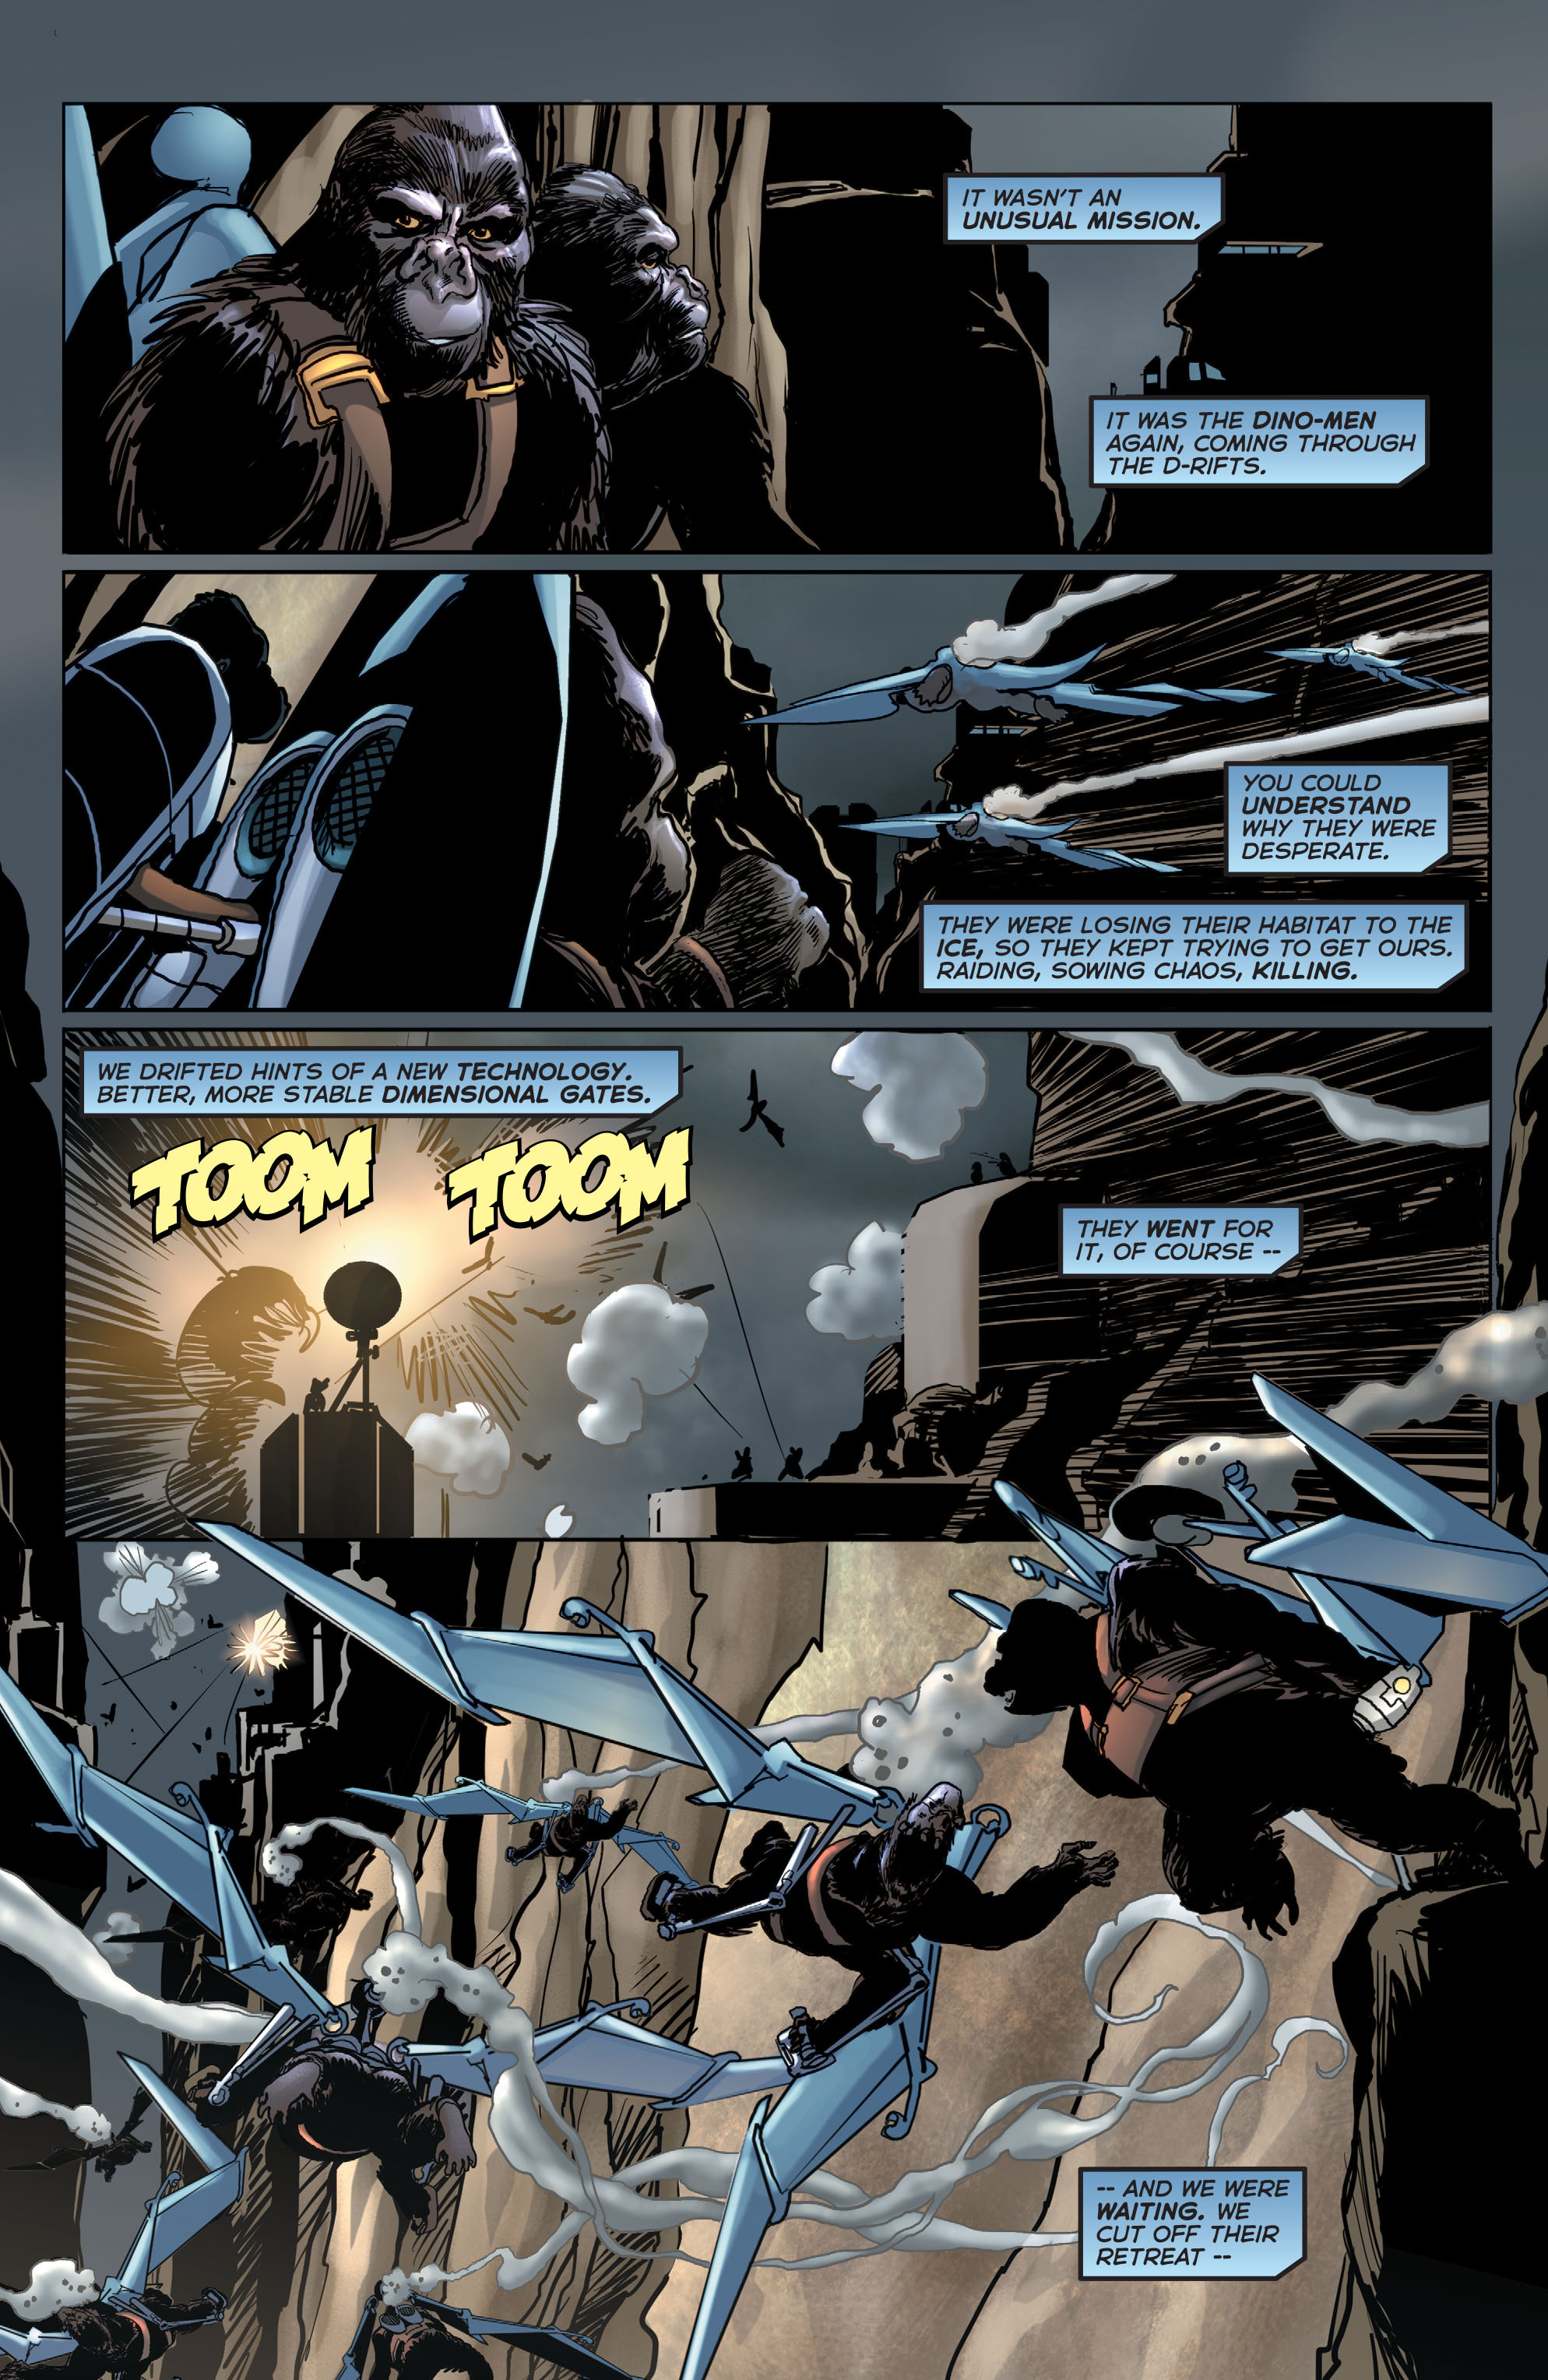 Astro City (2013-): Chapter 24 - Page 2